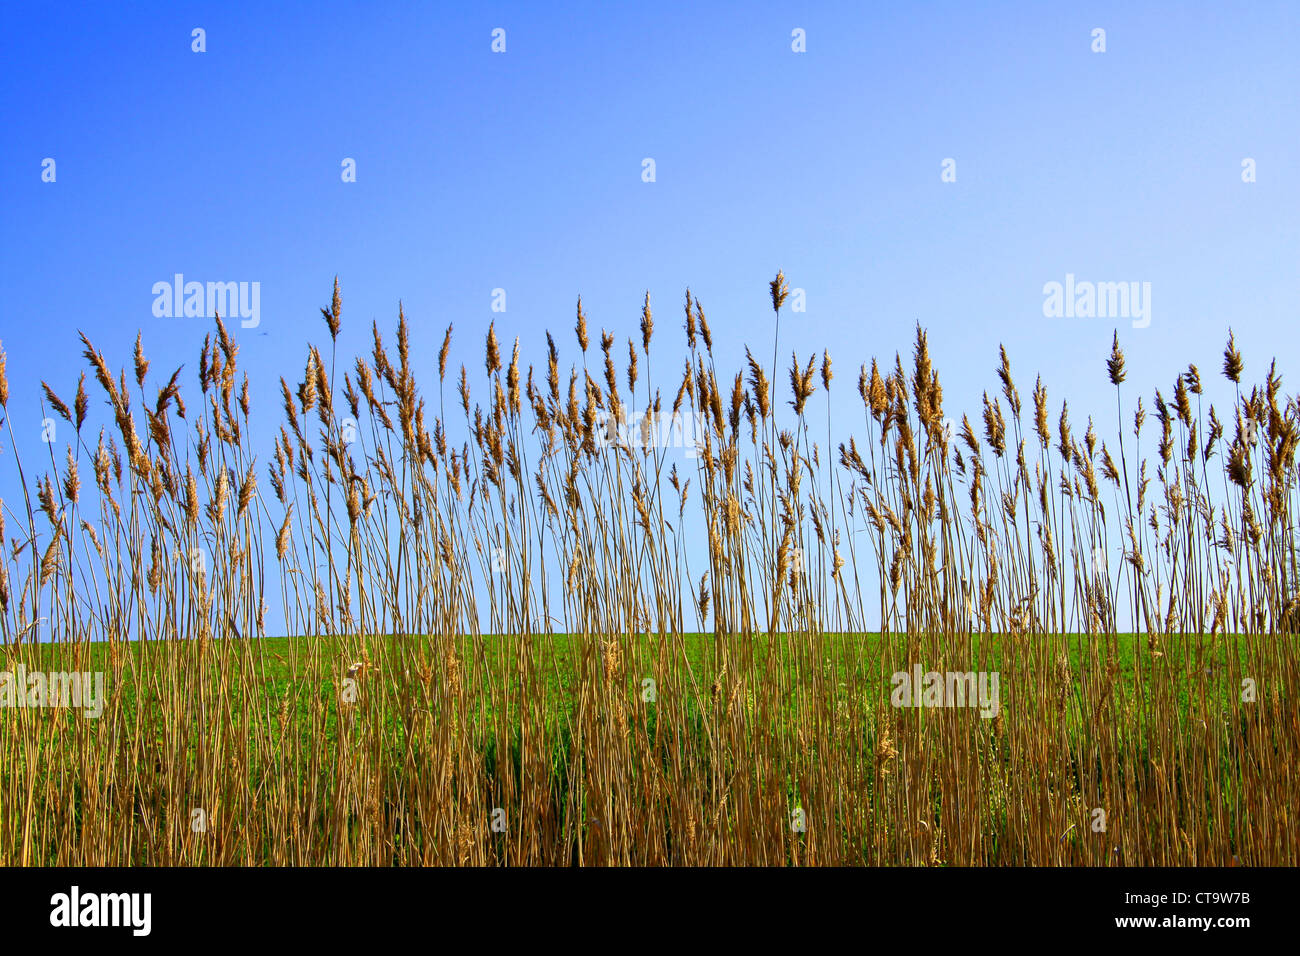 Tall grasses in golden yellow in the foreground, one third green field and two thirds blue sky in the background, nice vignettin Stock Photo